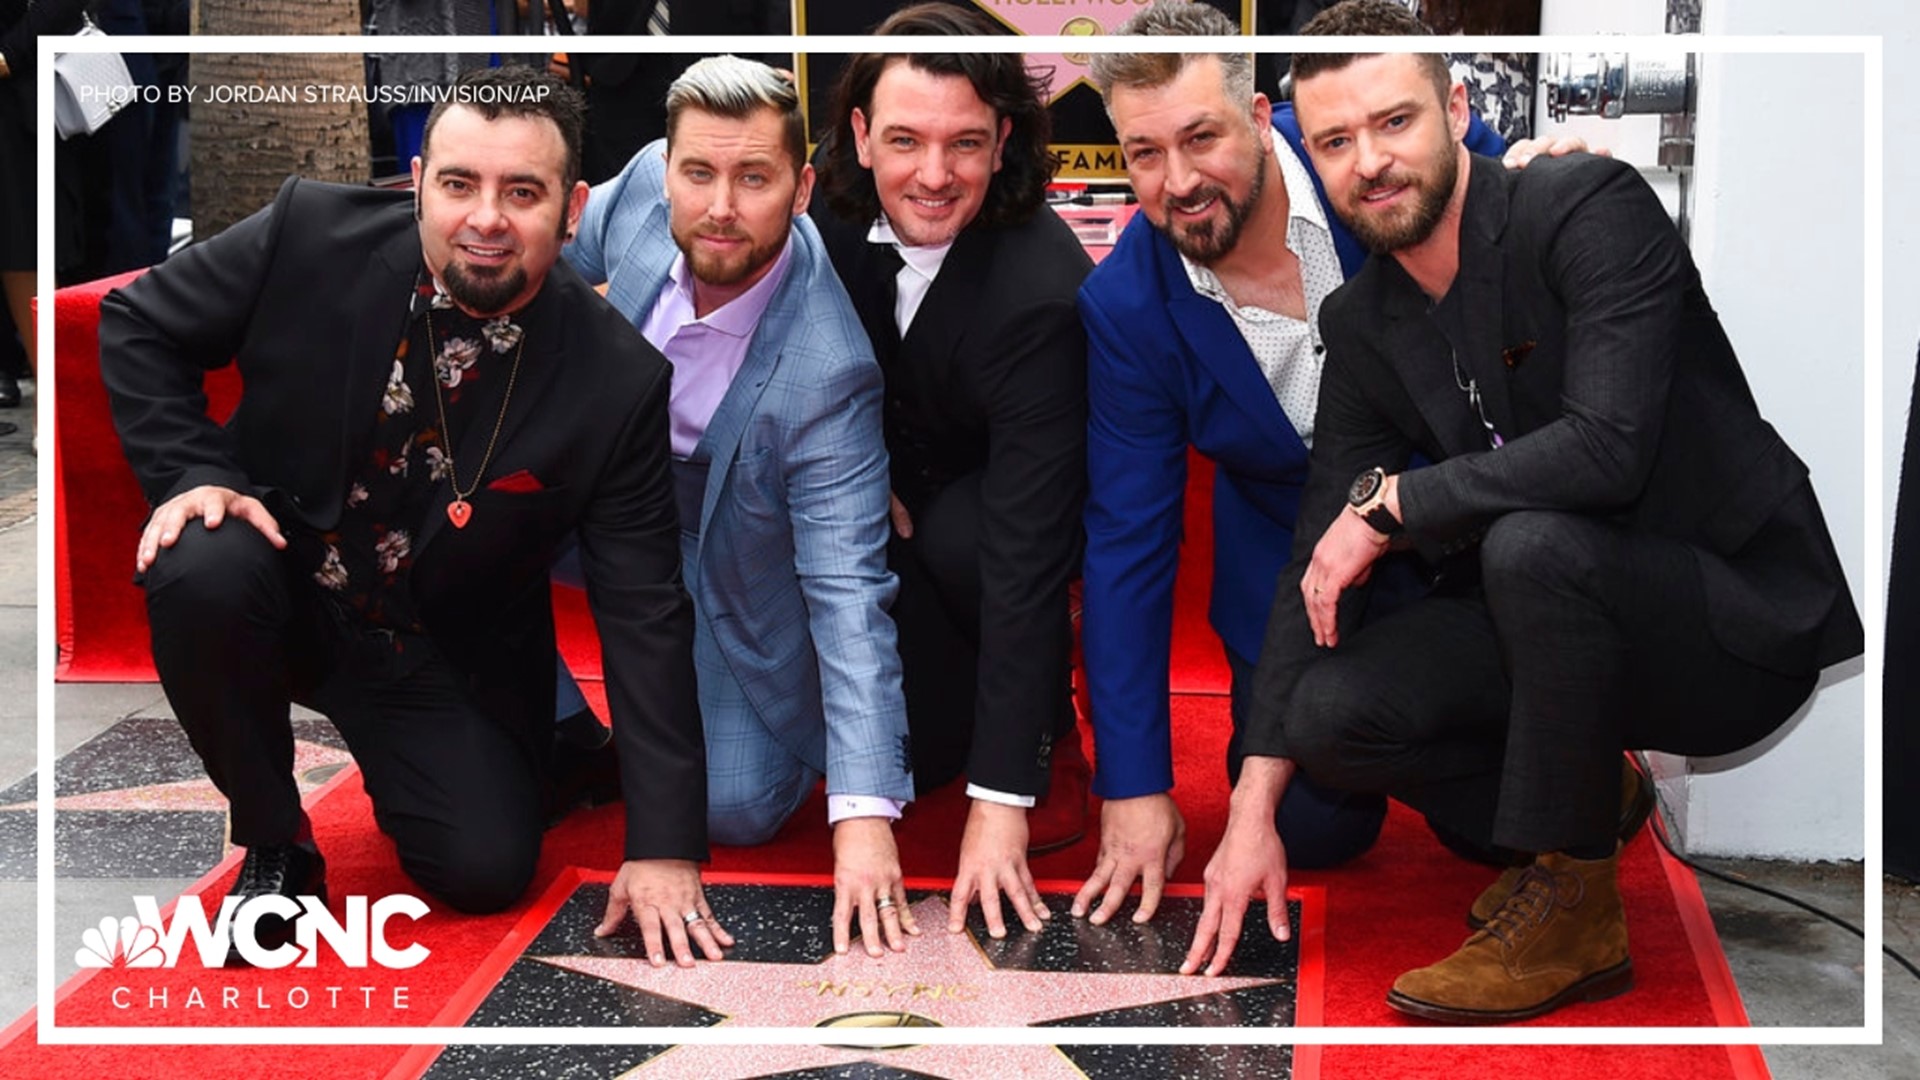 The boy band is reuniting once again with popstar Justin Timberlake revealing his former bandmates will make an appearance on his new album.